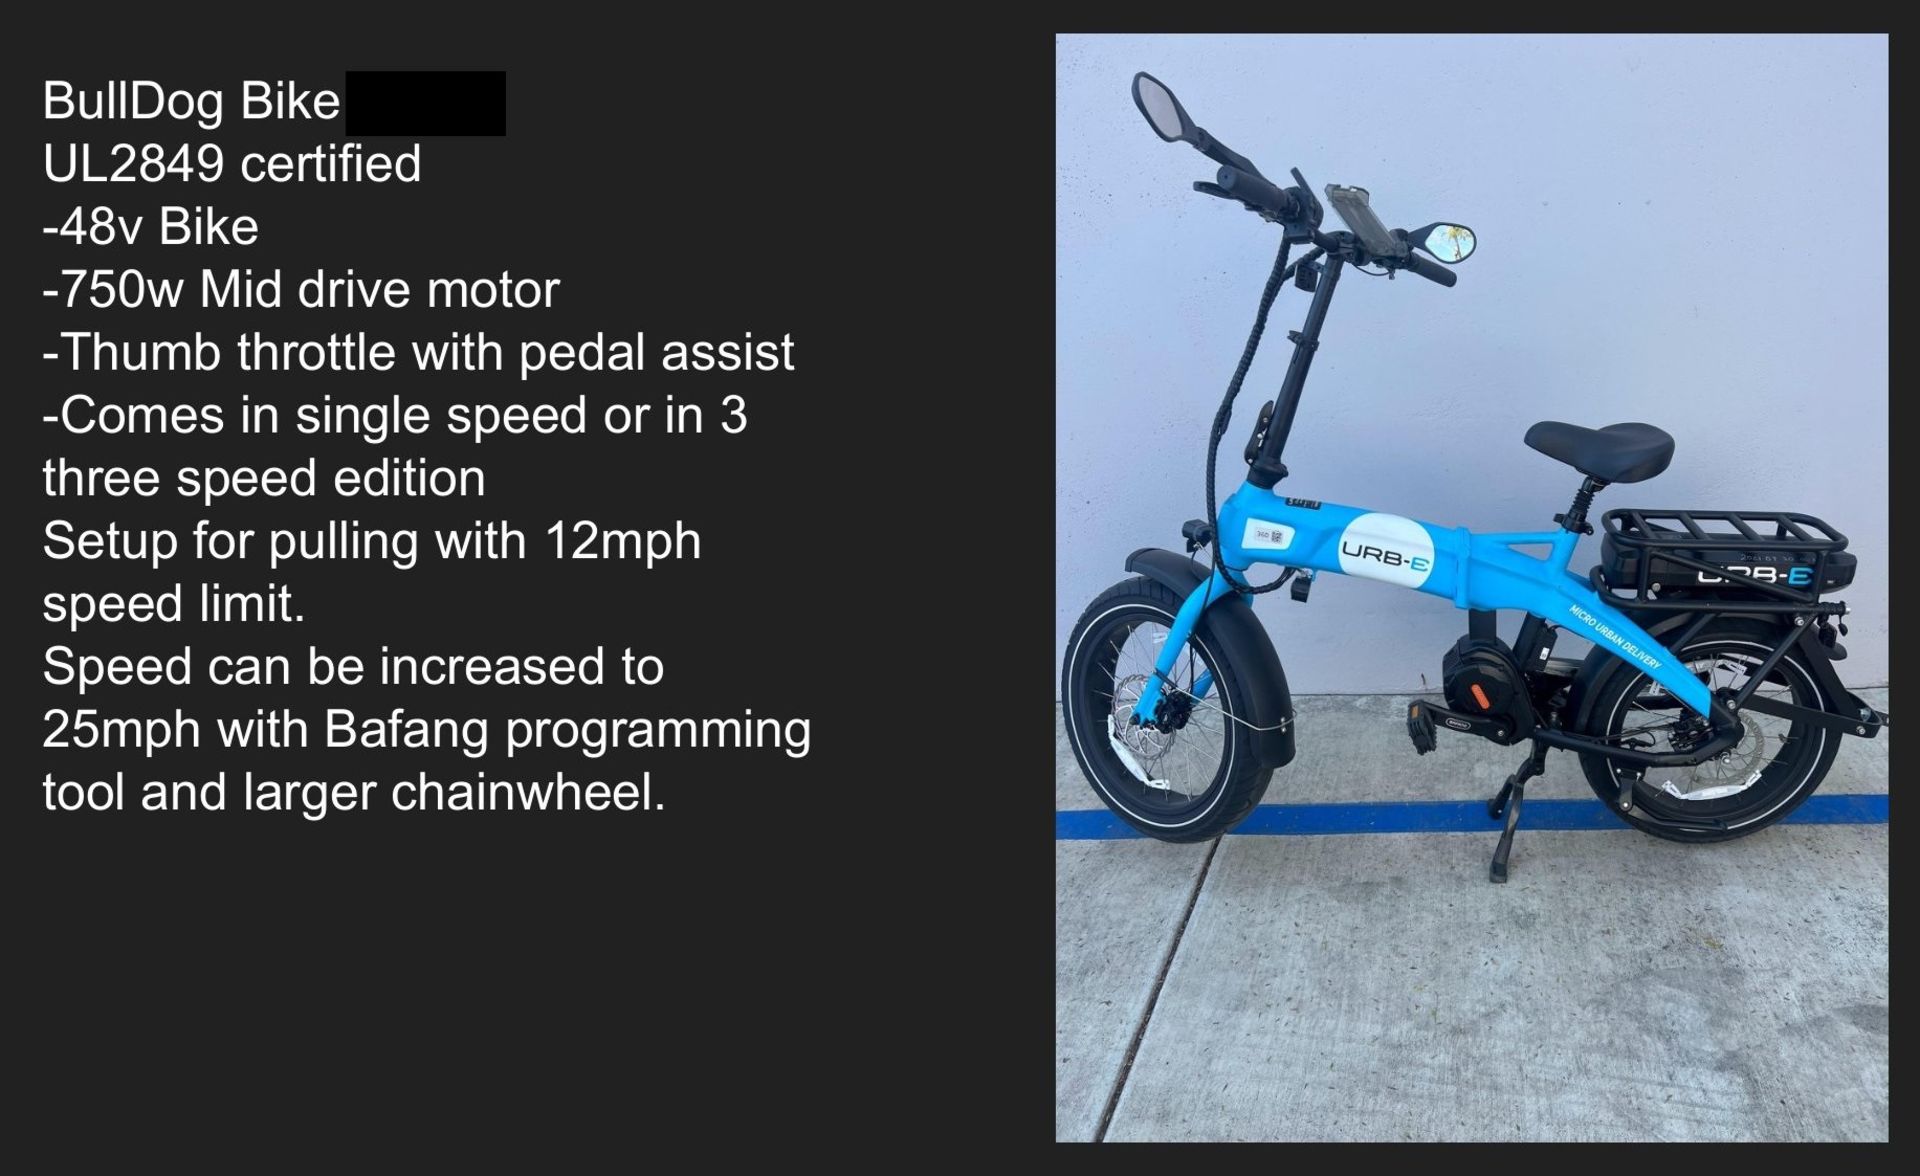 URB-E ELECTRIC DELIVERY BIKE, NEW, 750W MID DRIVE MOTOR, SINGLE SPEED, THUMB THROTTLE WITH PEDAL - Image 6 of 6